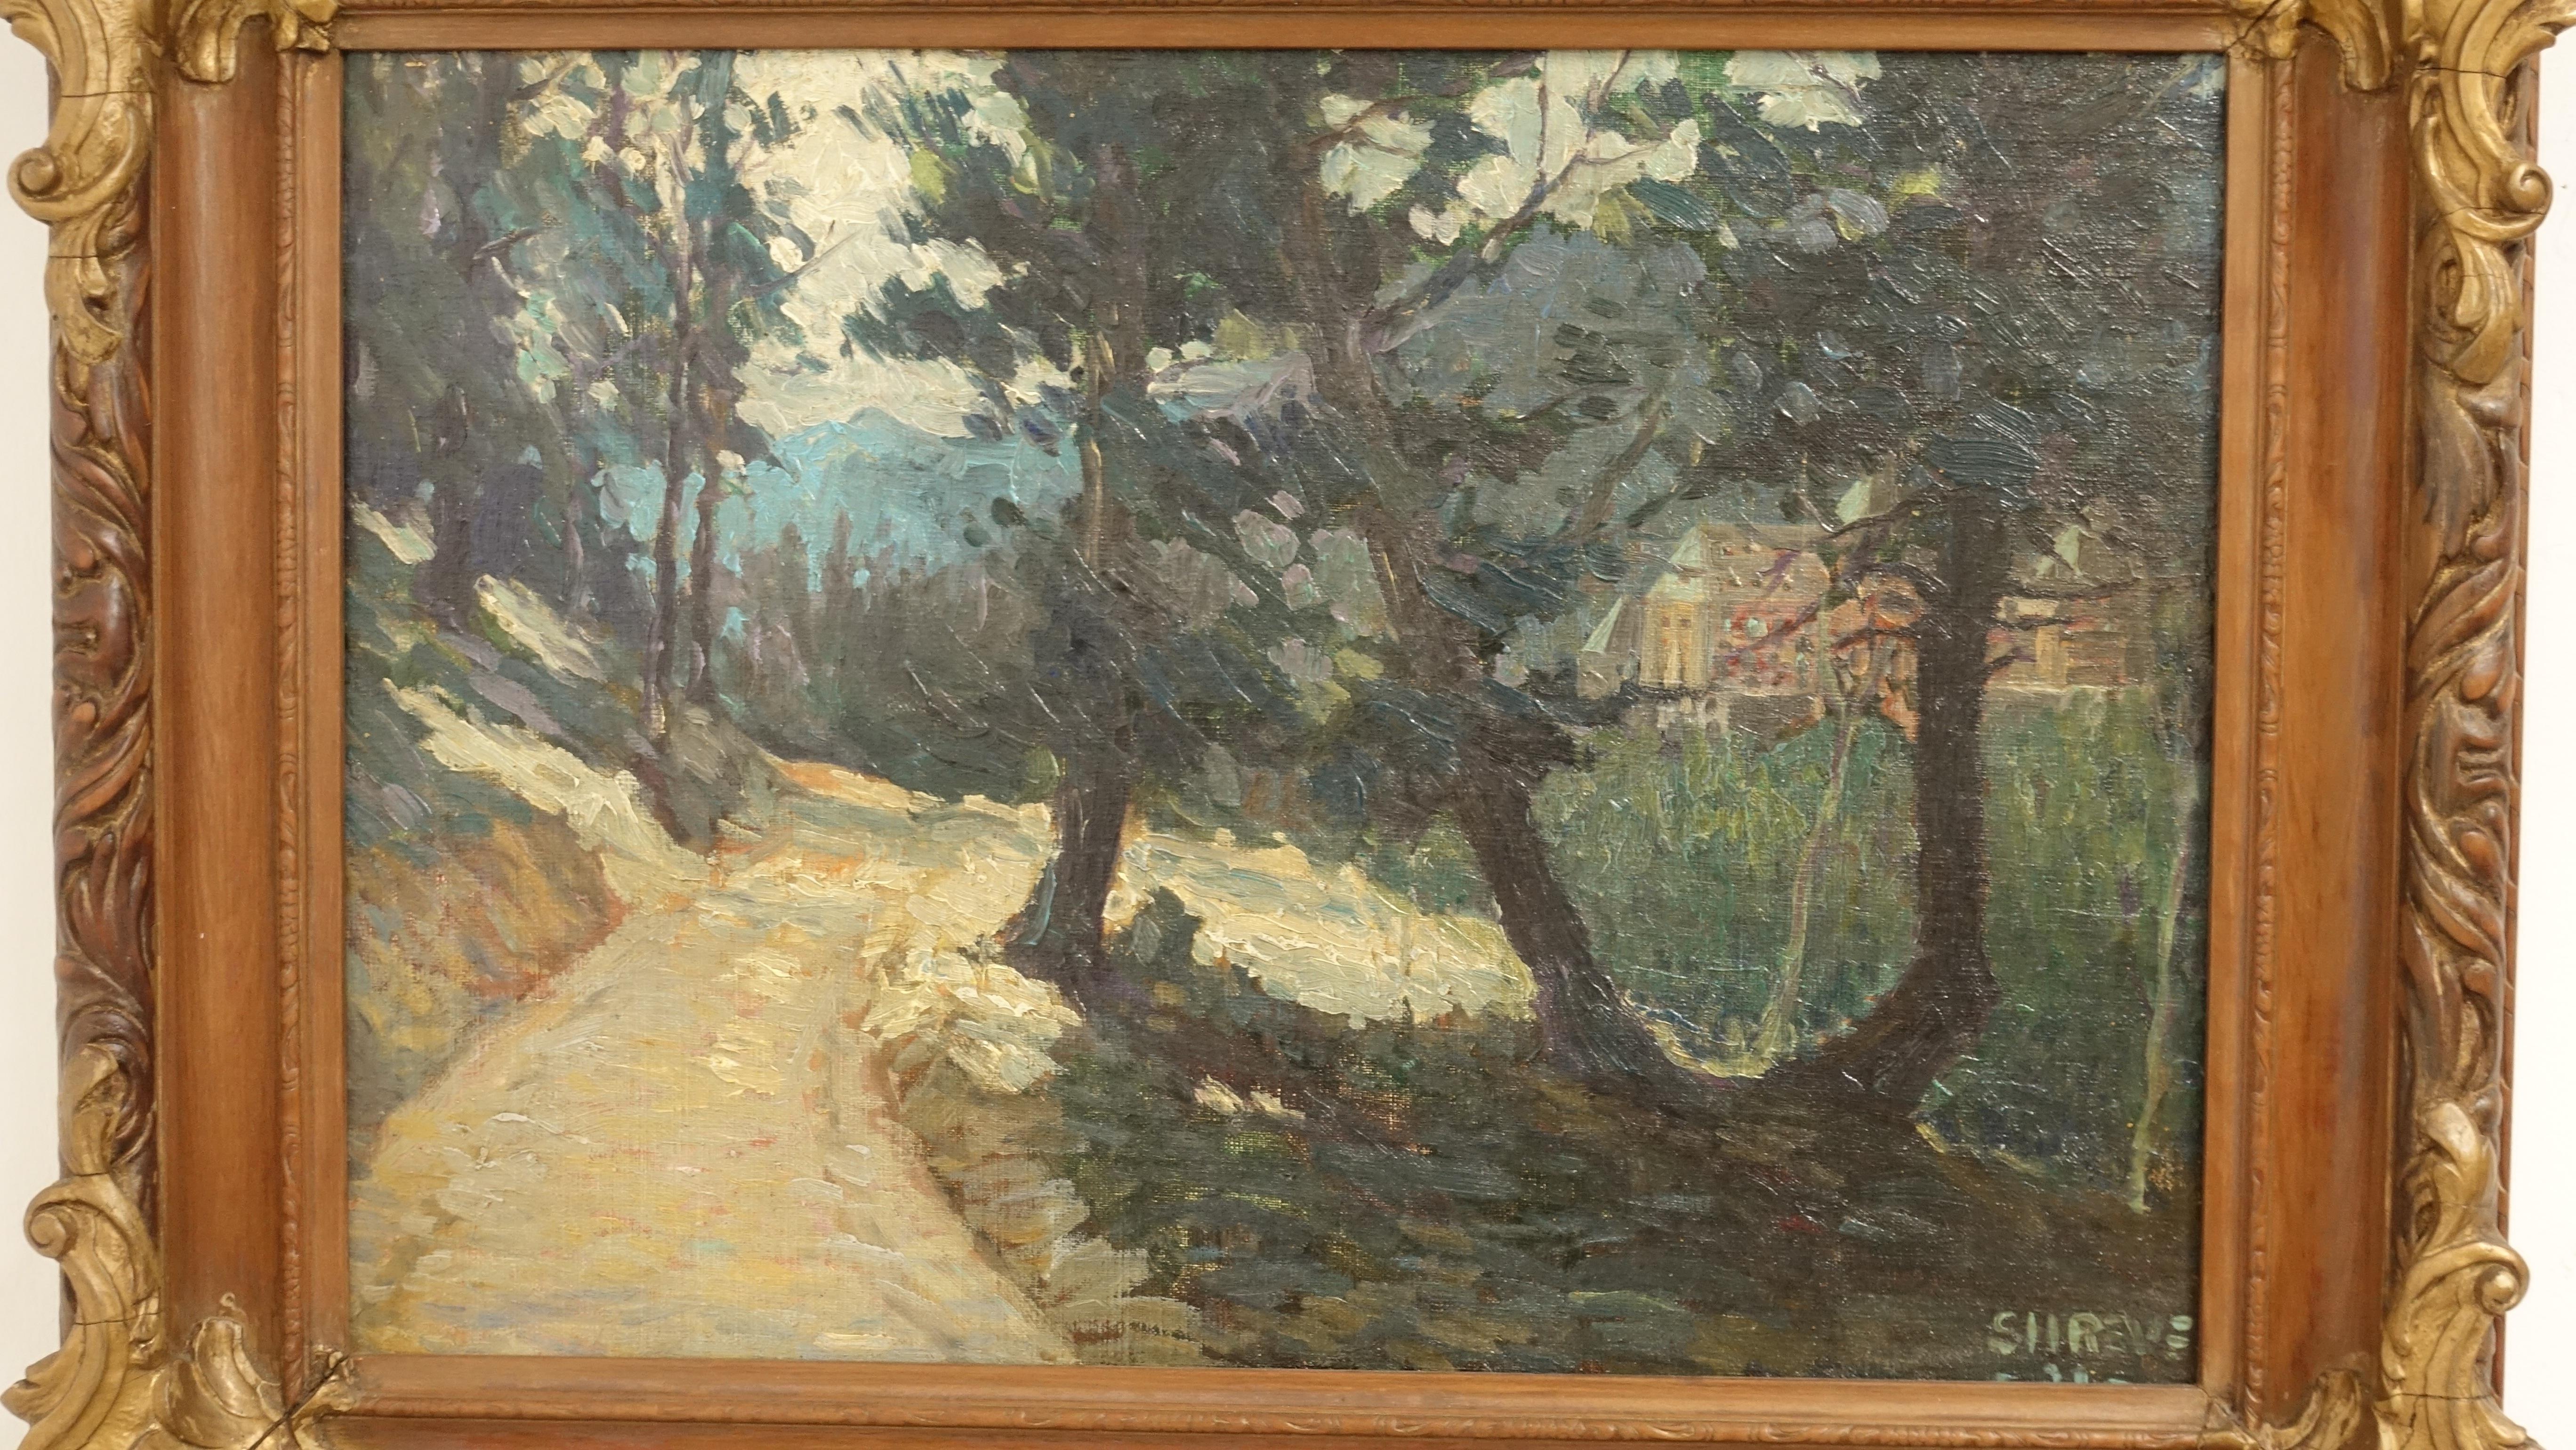 Hand-Painted Impressionist Landscape Painting, Signed Shreve 1923 For Sale